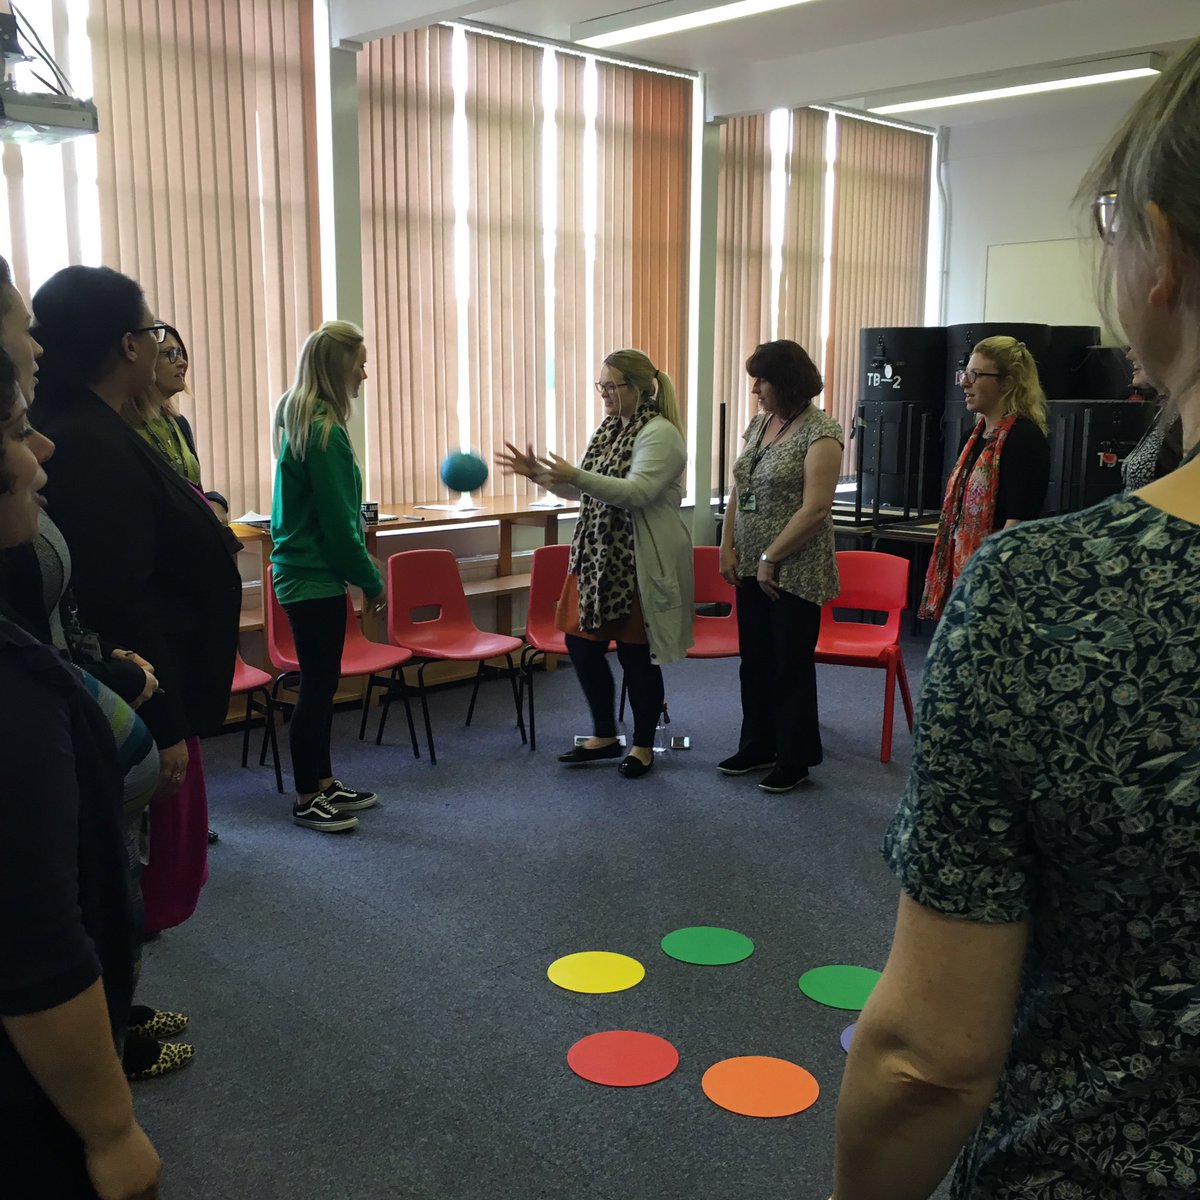 Had a great afternoon with the teachers @FairfieldAcad playing with rhythm and pitch! Thank you all for your lovely singing! @CMaalawy @sallycathcart @Voices_Found @DRETMus #playingislearning #phftdf